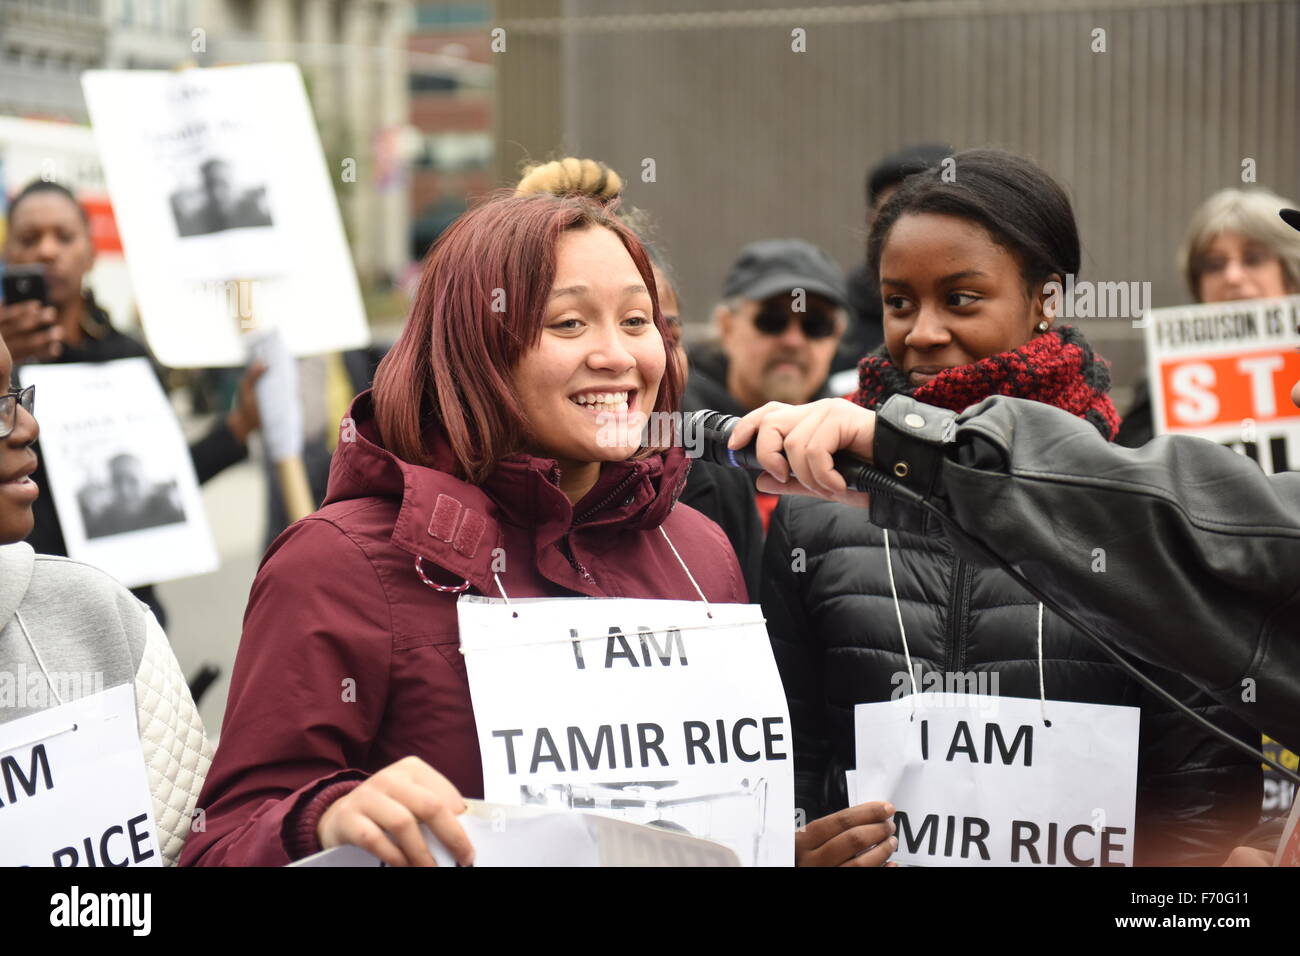 New York City, United States. 22nd Nov, 2015. Teen marchers introduce themselves at Union Square. Stop Mass Incarcerations Network sponsored a children's march demanding accountability on the one year anniversary of Tamir Rice's death at the hands of the Cleveland police. © Andy Katz/Pacific Press/Alamy Live News Stock Photo